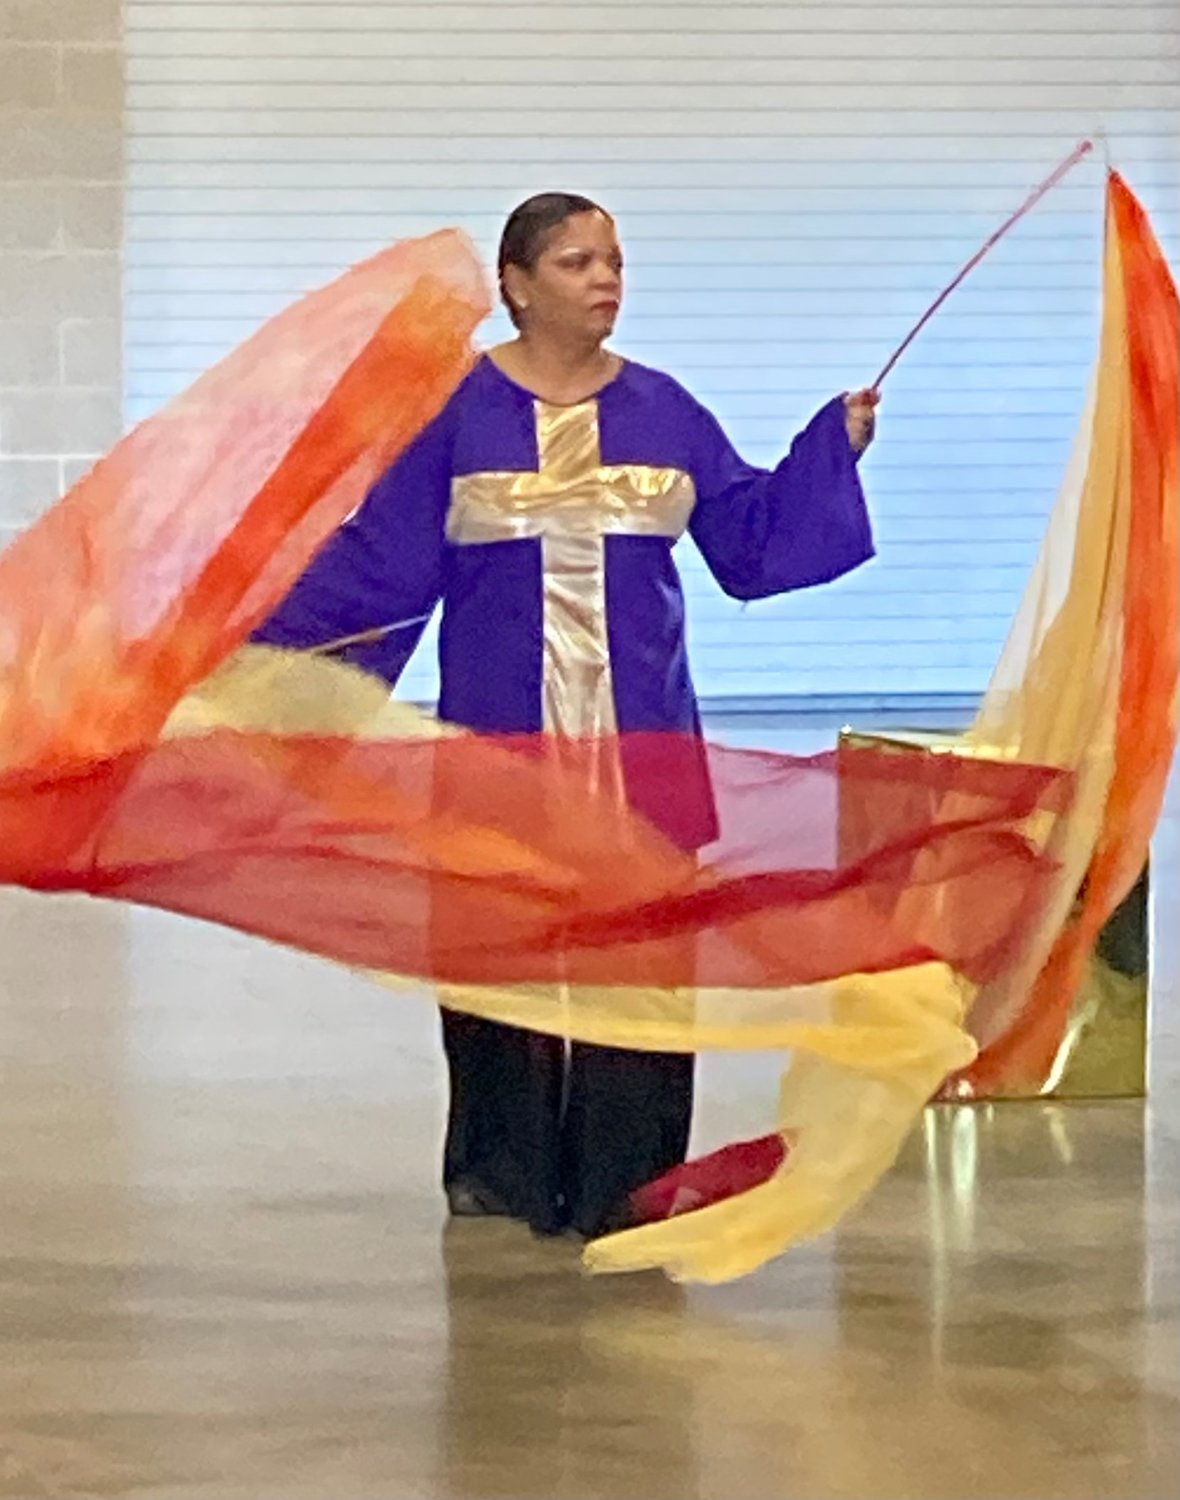 Pam Mayes Jones performs a dance using colorful flags as part of the women’s conference at J.B. Wells Community Center.